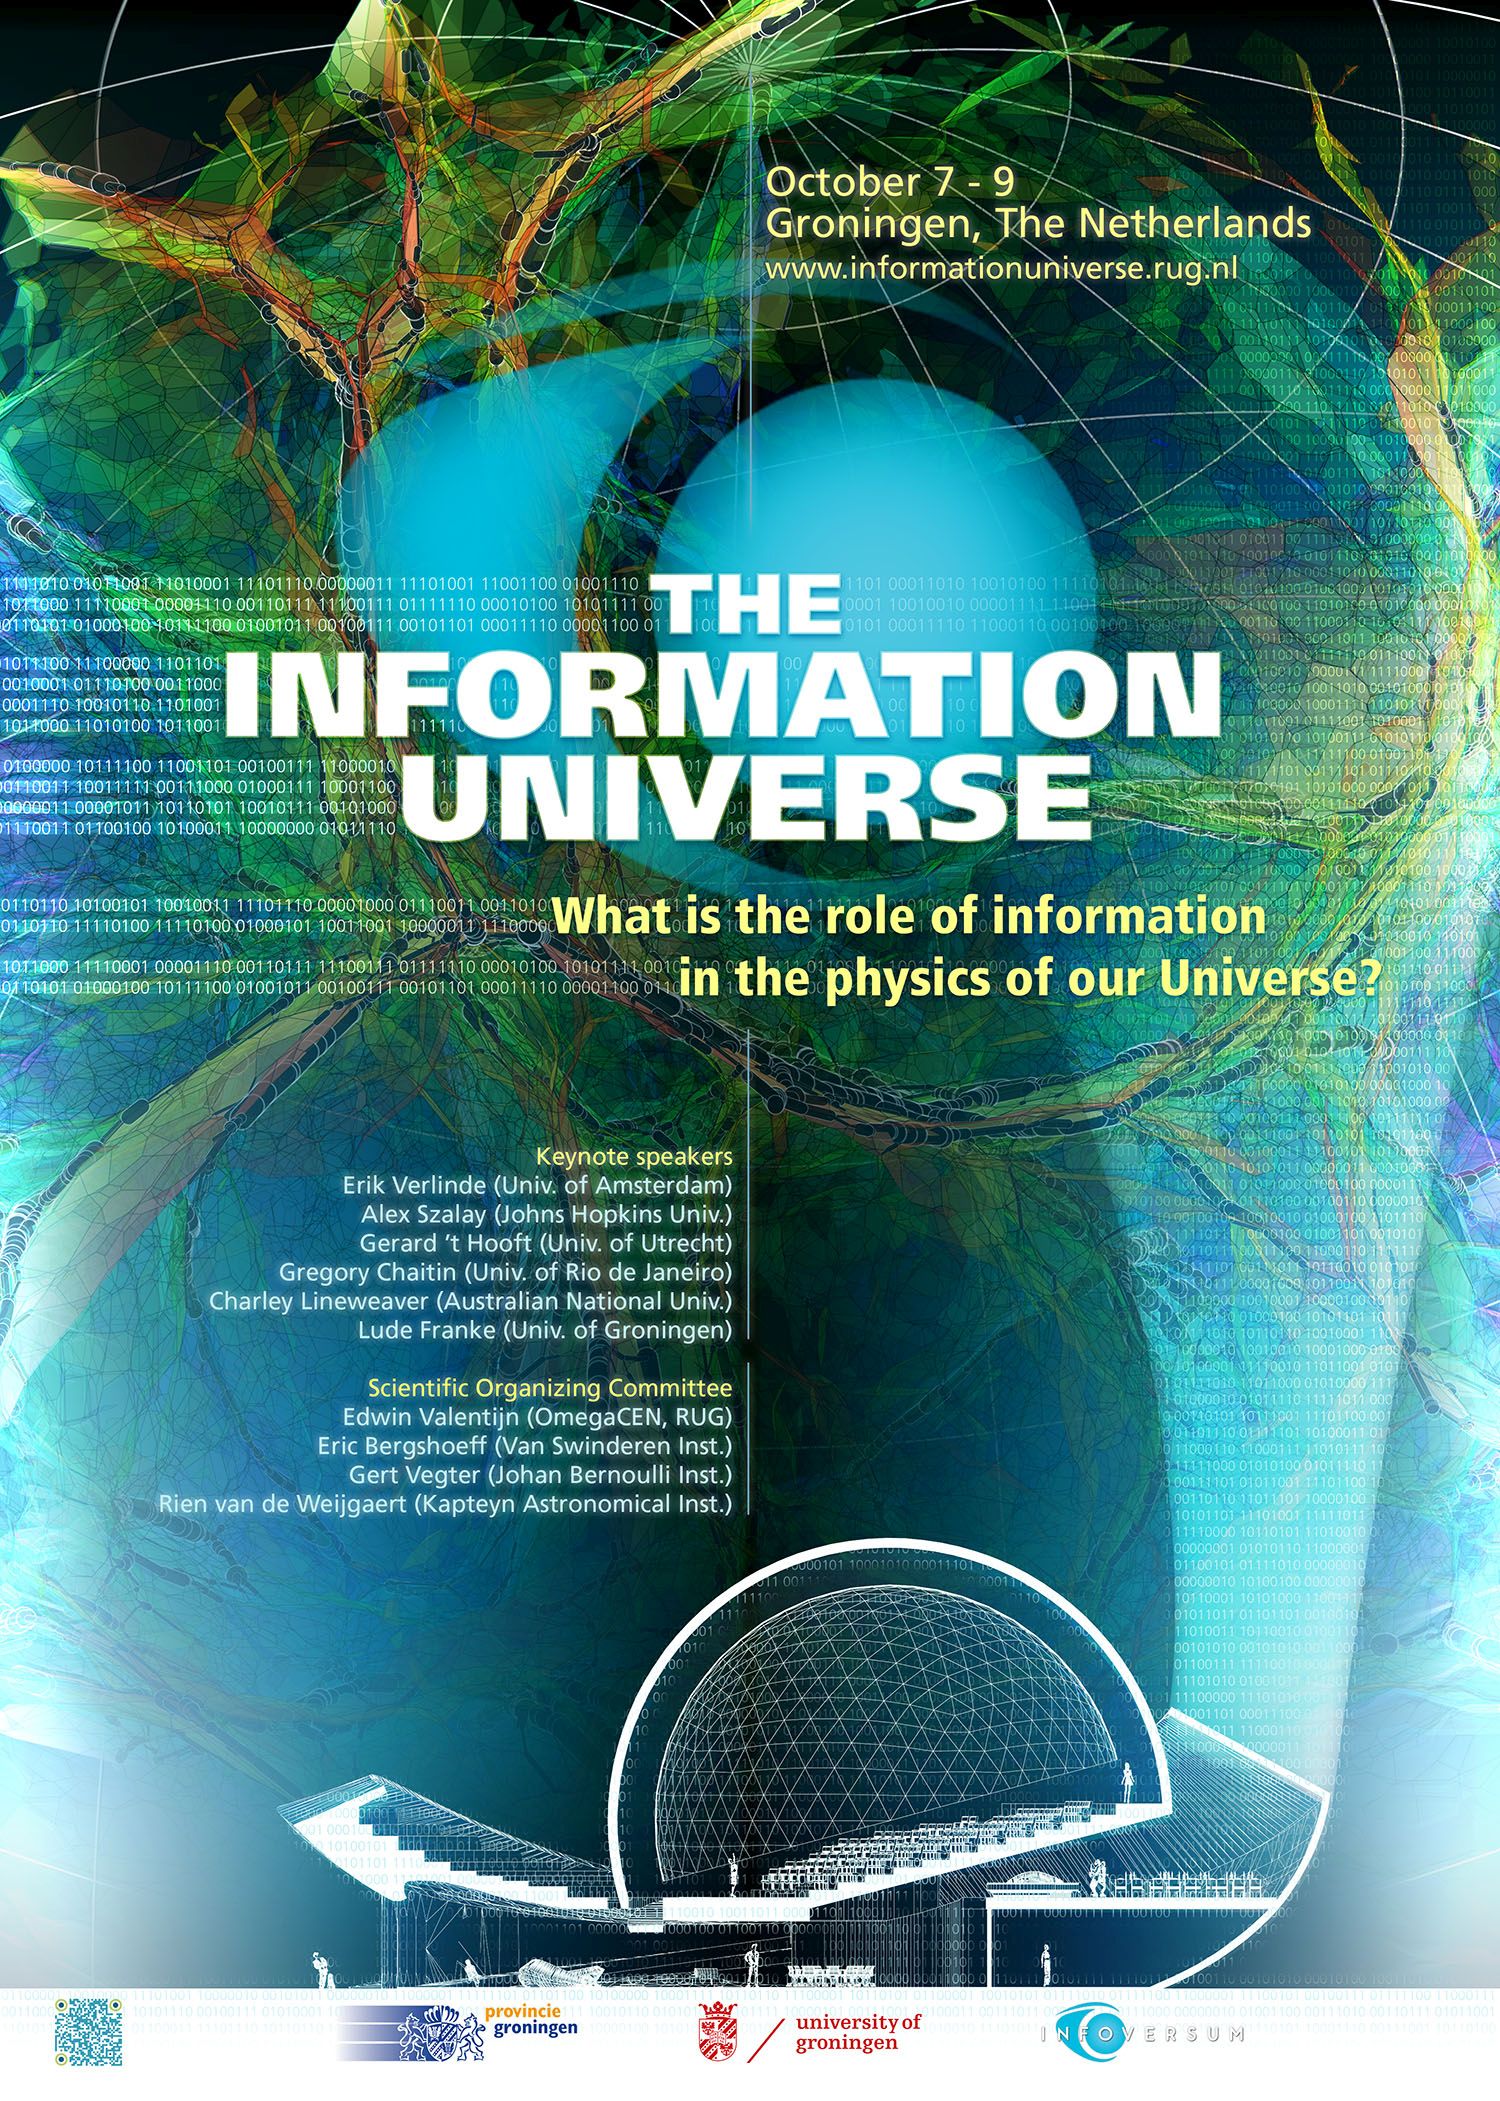 The Information Universe
            Conference